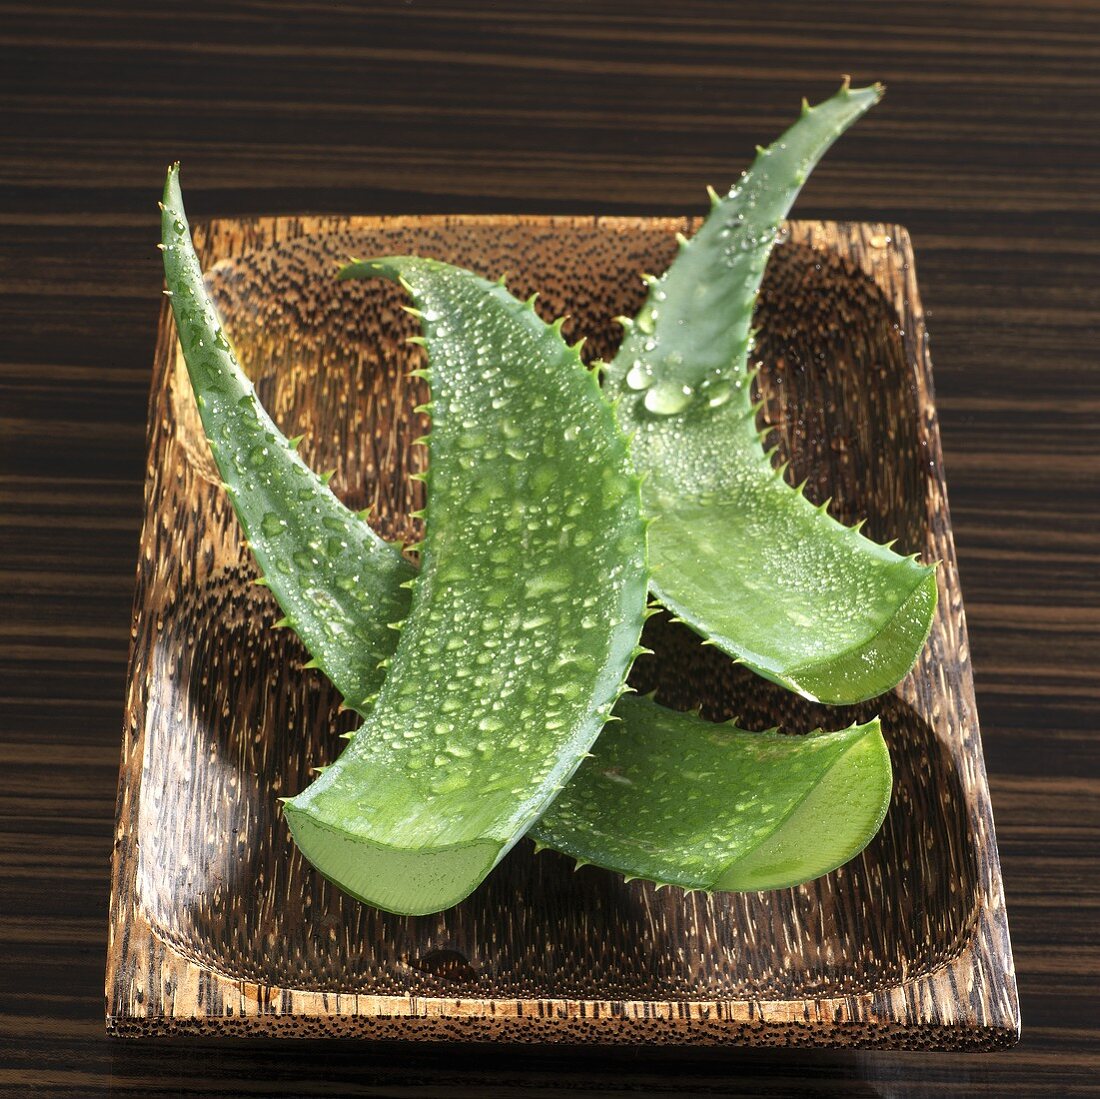 Aloe vera leaves with drops of water in wooden dish